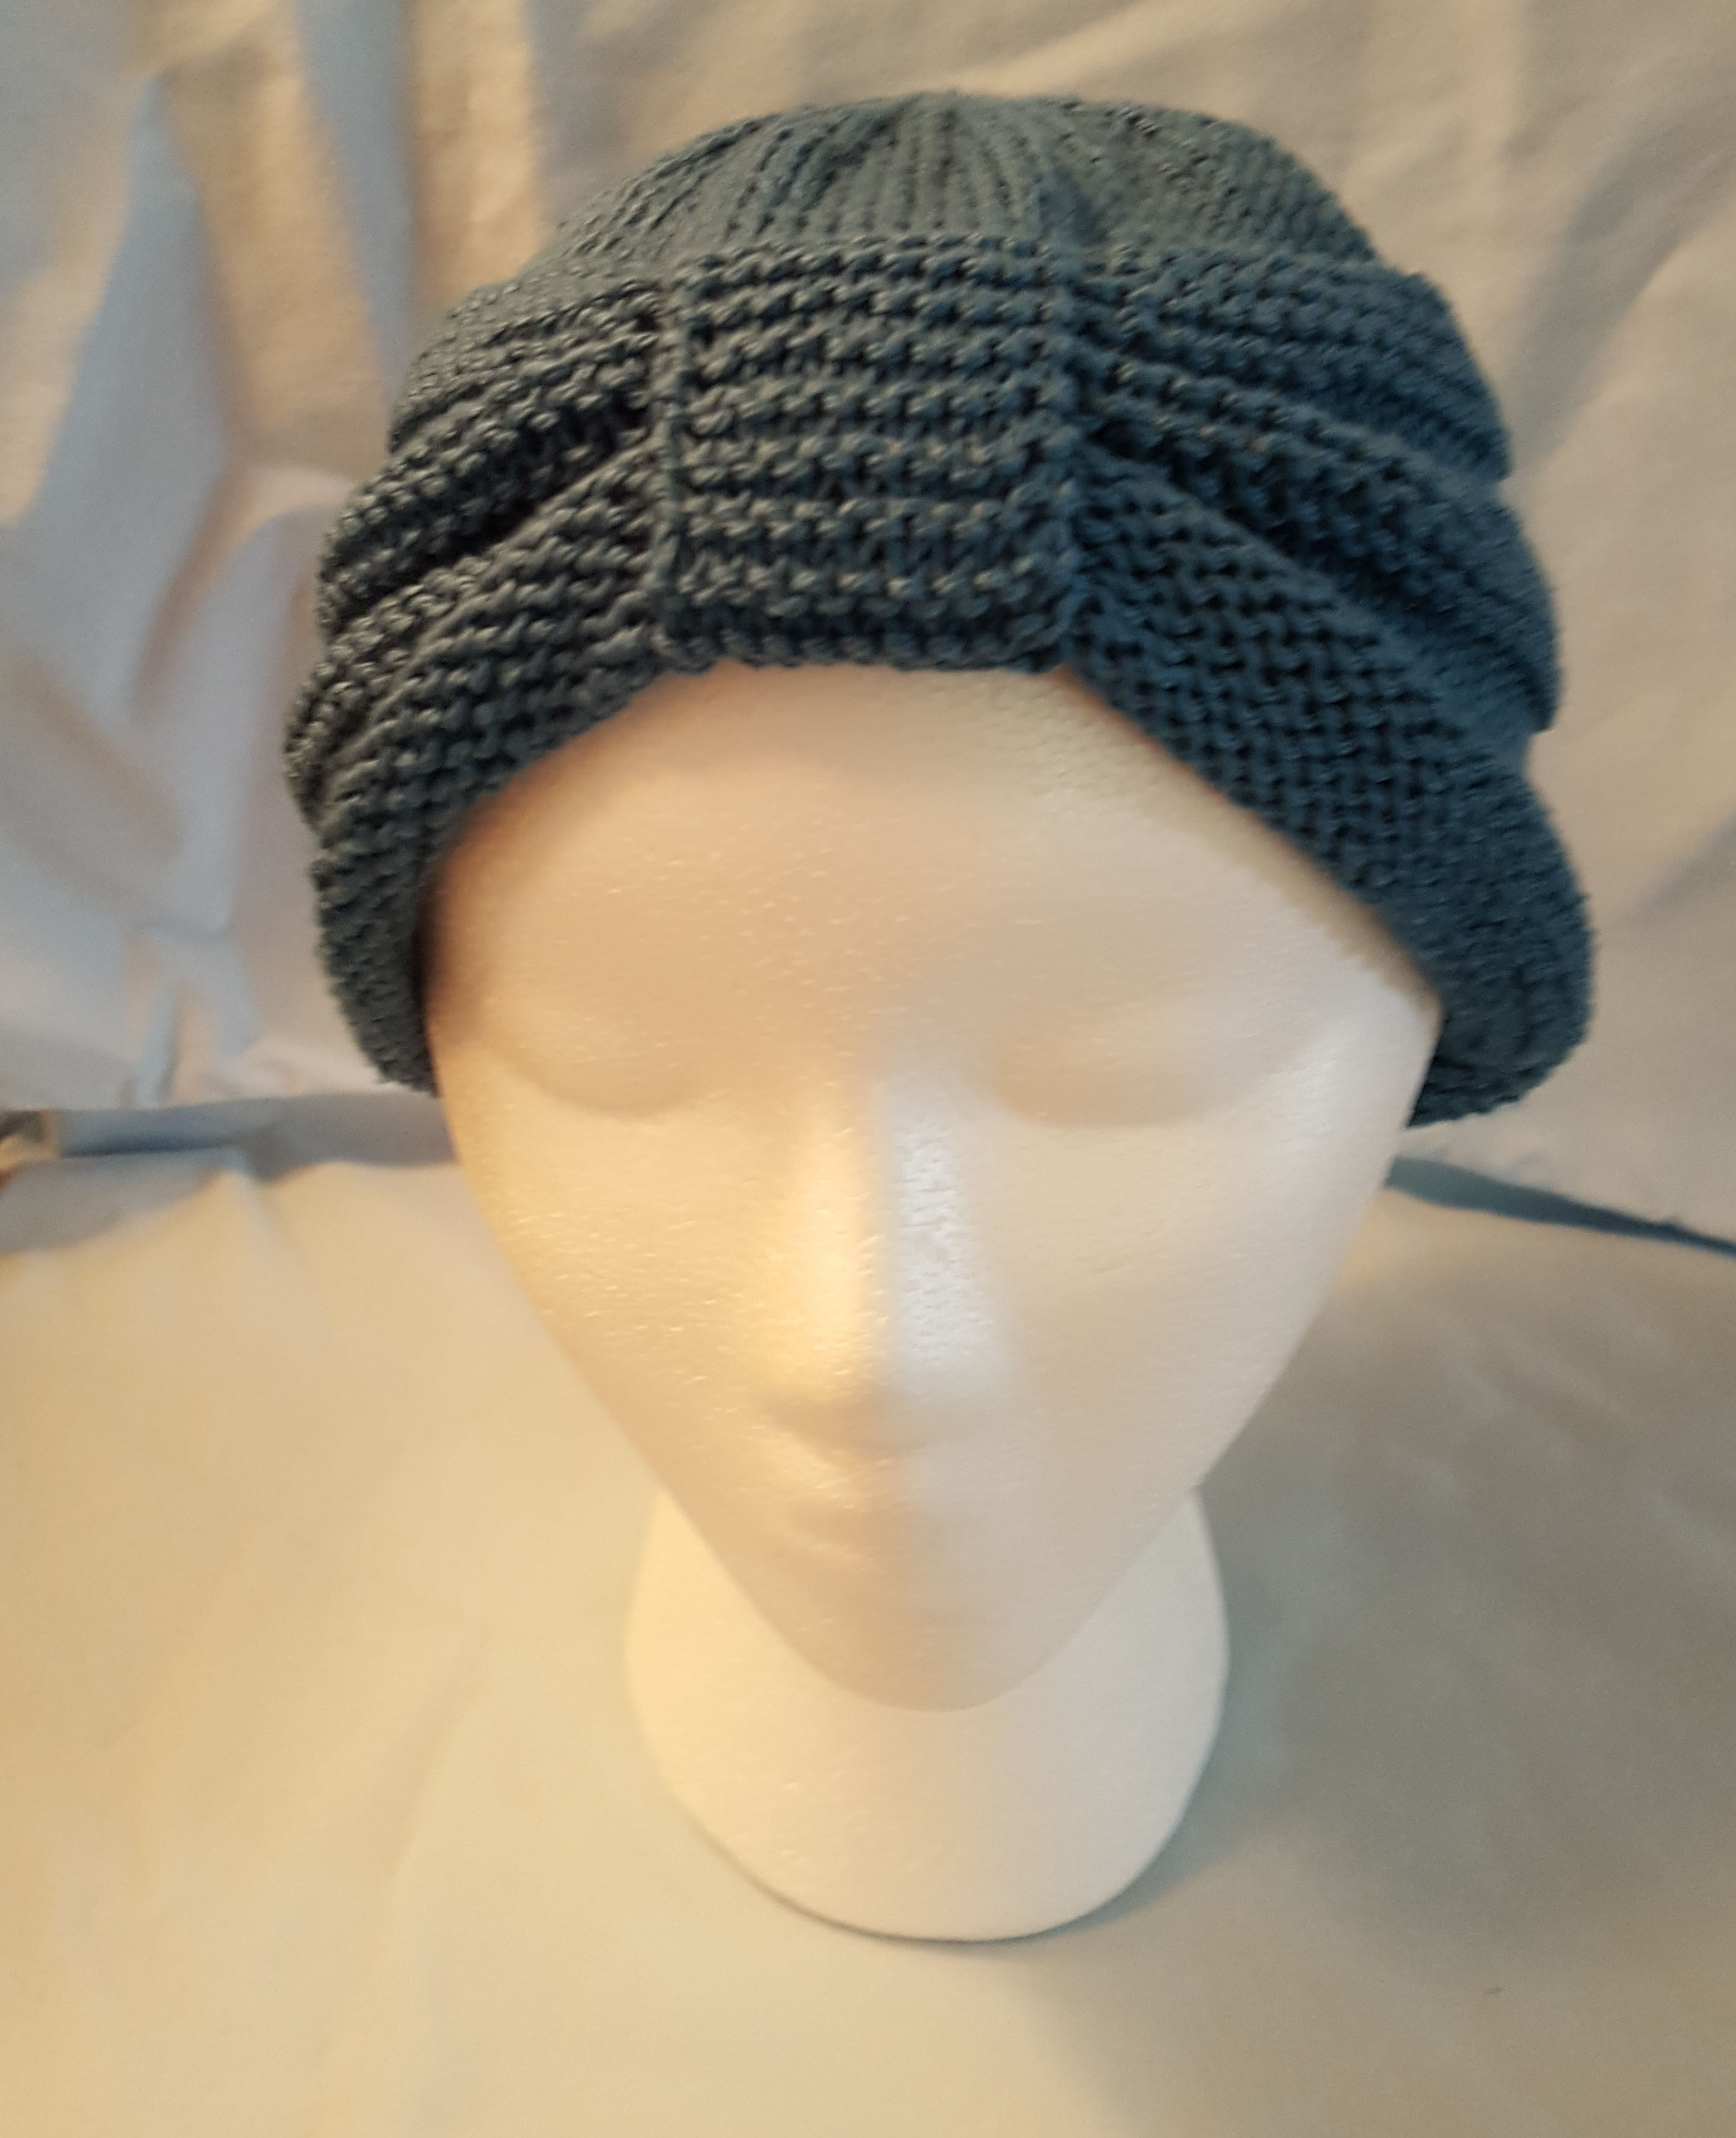 Crochet Chemo Hat Pattern New Pattern Knitted Turban Style Chemo Hat